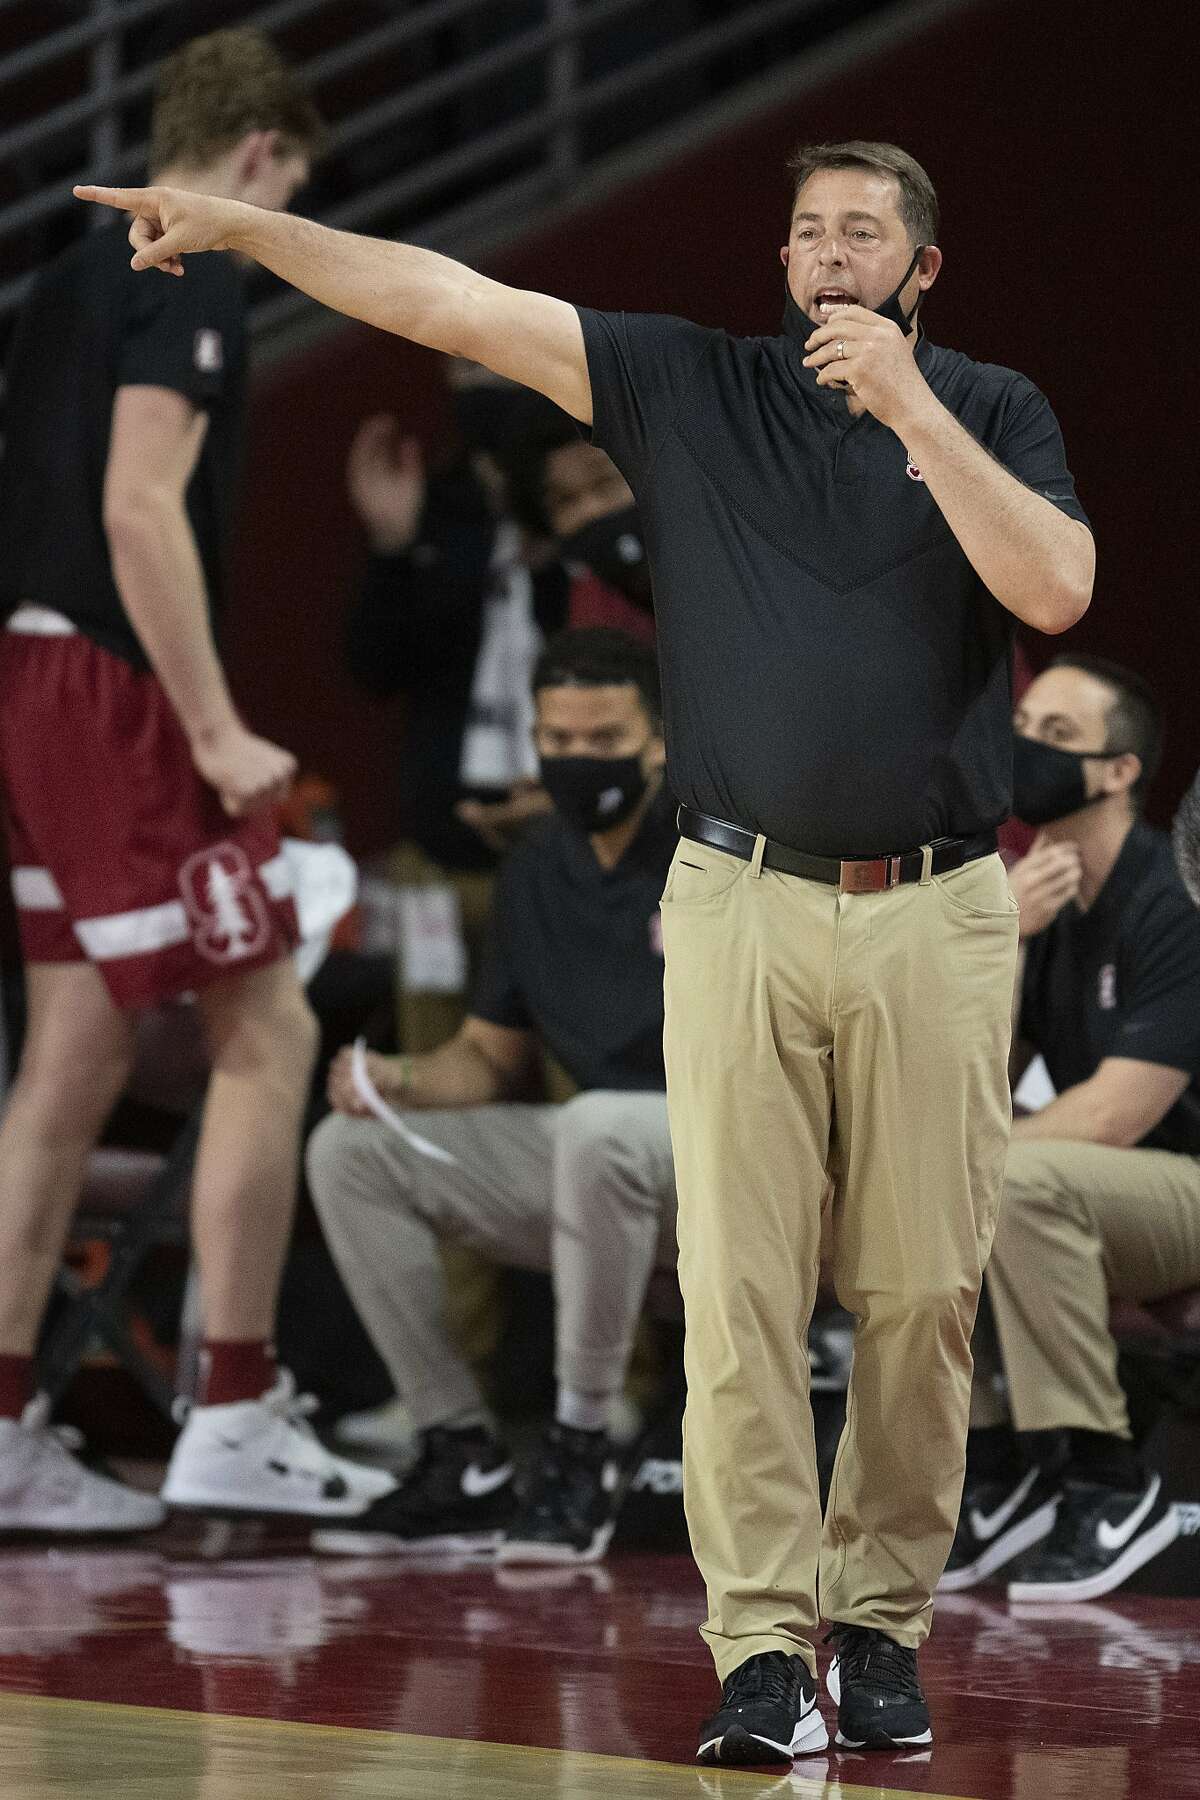 Stanford coach Jerod Haase gives instructions to players during the first half of the team's NCAA college basketball game against Southern California on Wednesday, March 3, 2021, in Los Angeles. (AP Photo/Kyusung Gong)